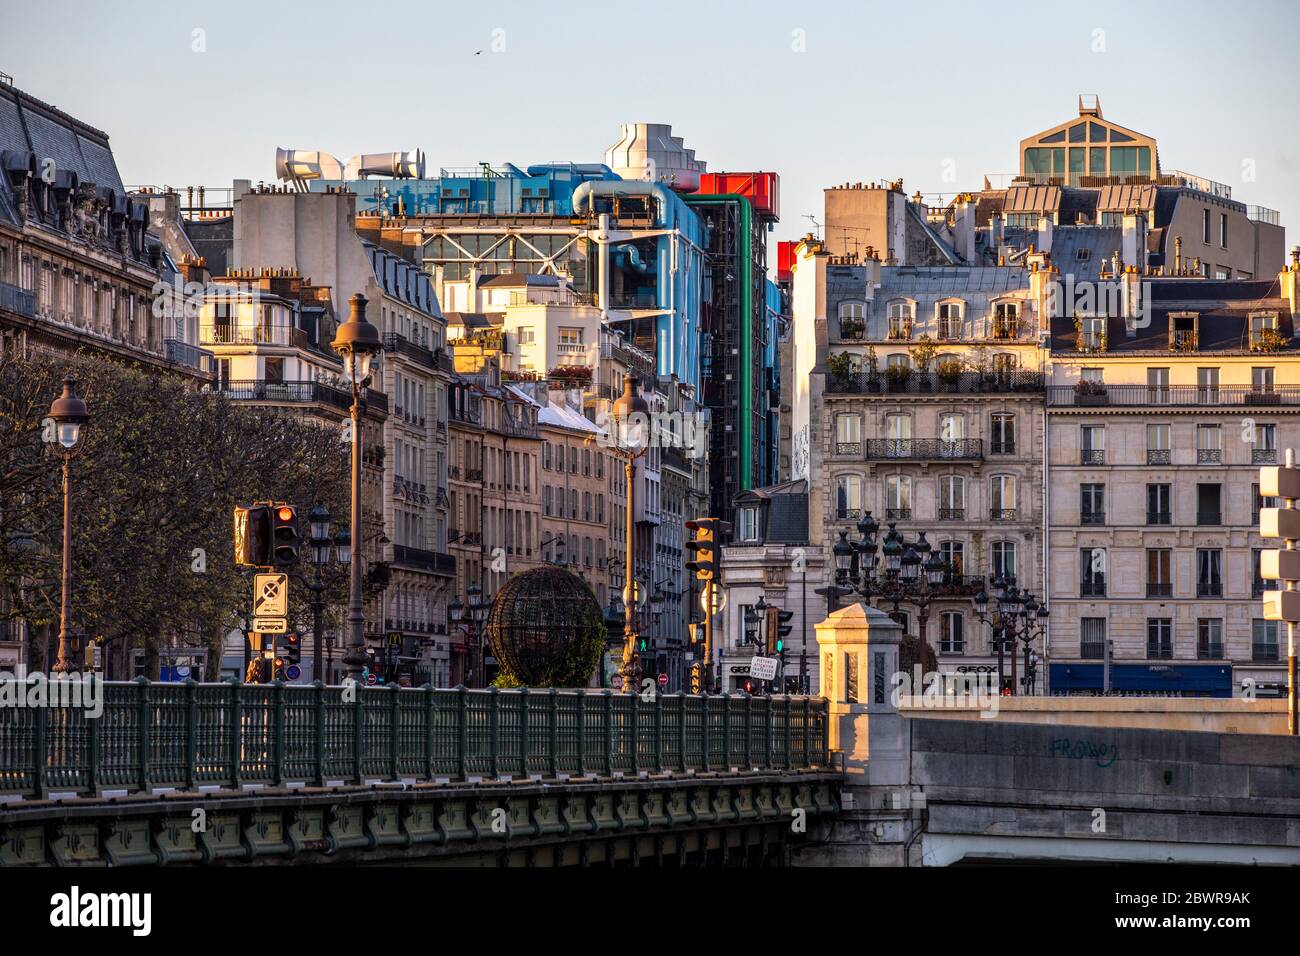 Paris, France - April 4, 2020: Typical parisian building and Beauboug center in background Stock Photo